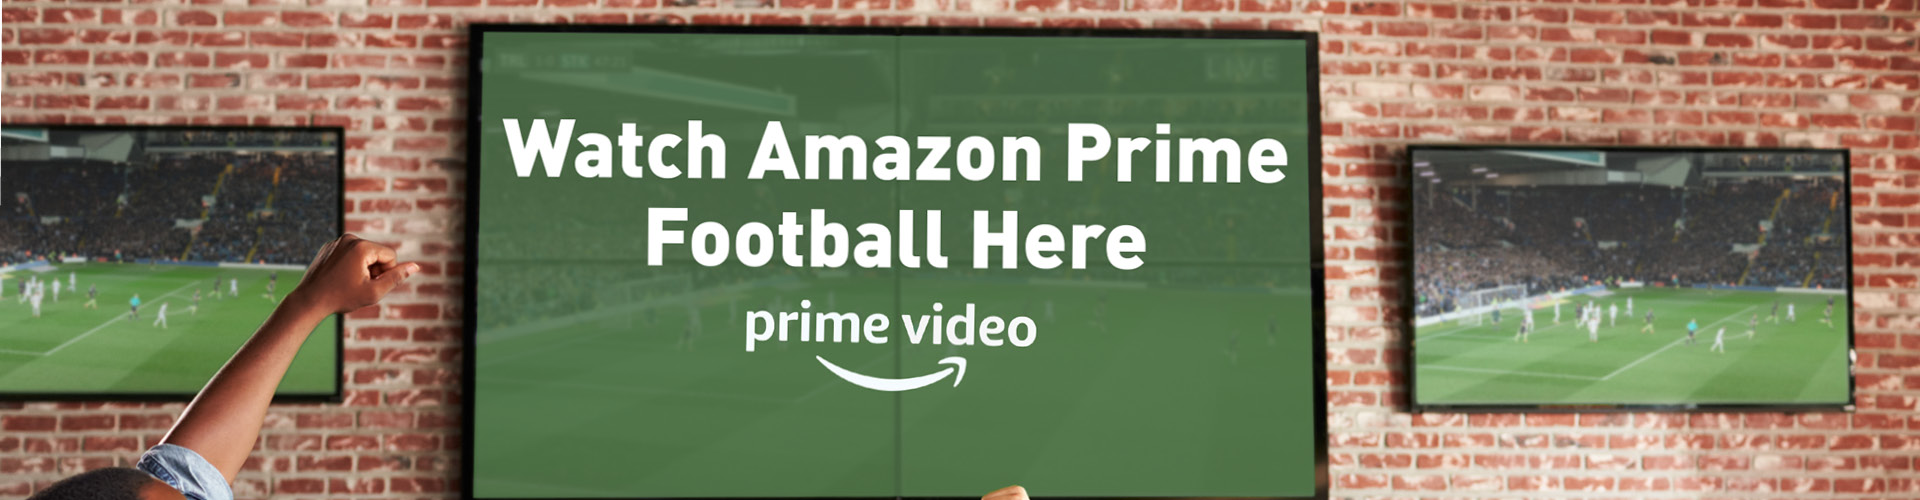 Watch Amazon Prime football at The Merchant in Leeds